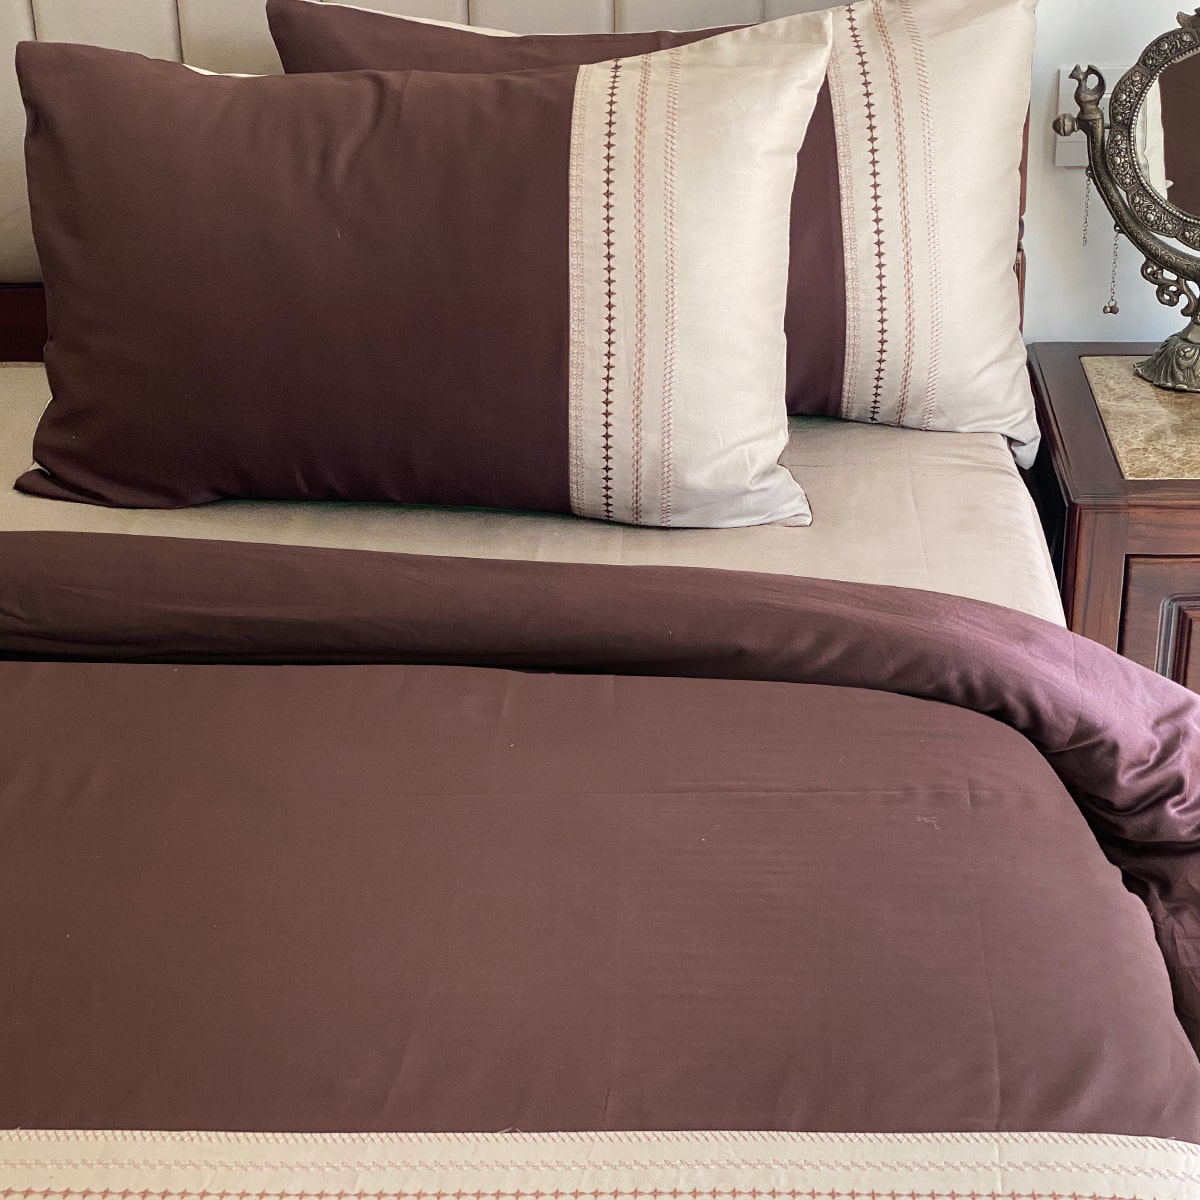 Divine Beige and Coffee Mesmeric Duvet Cover